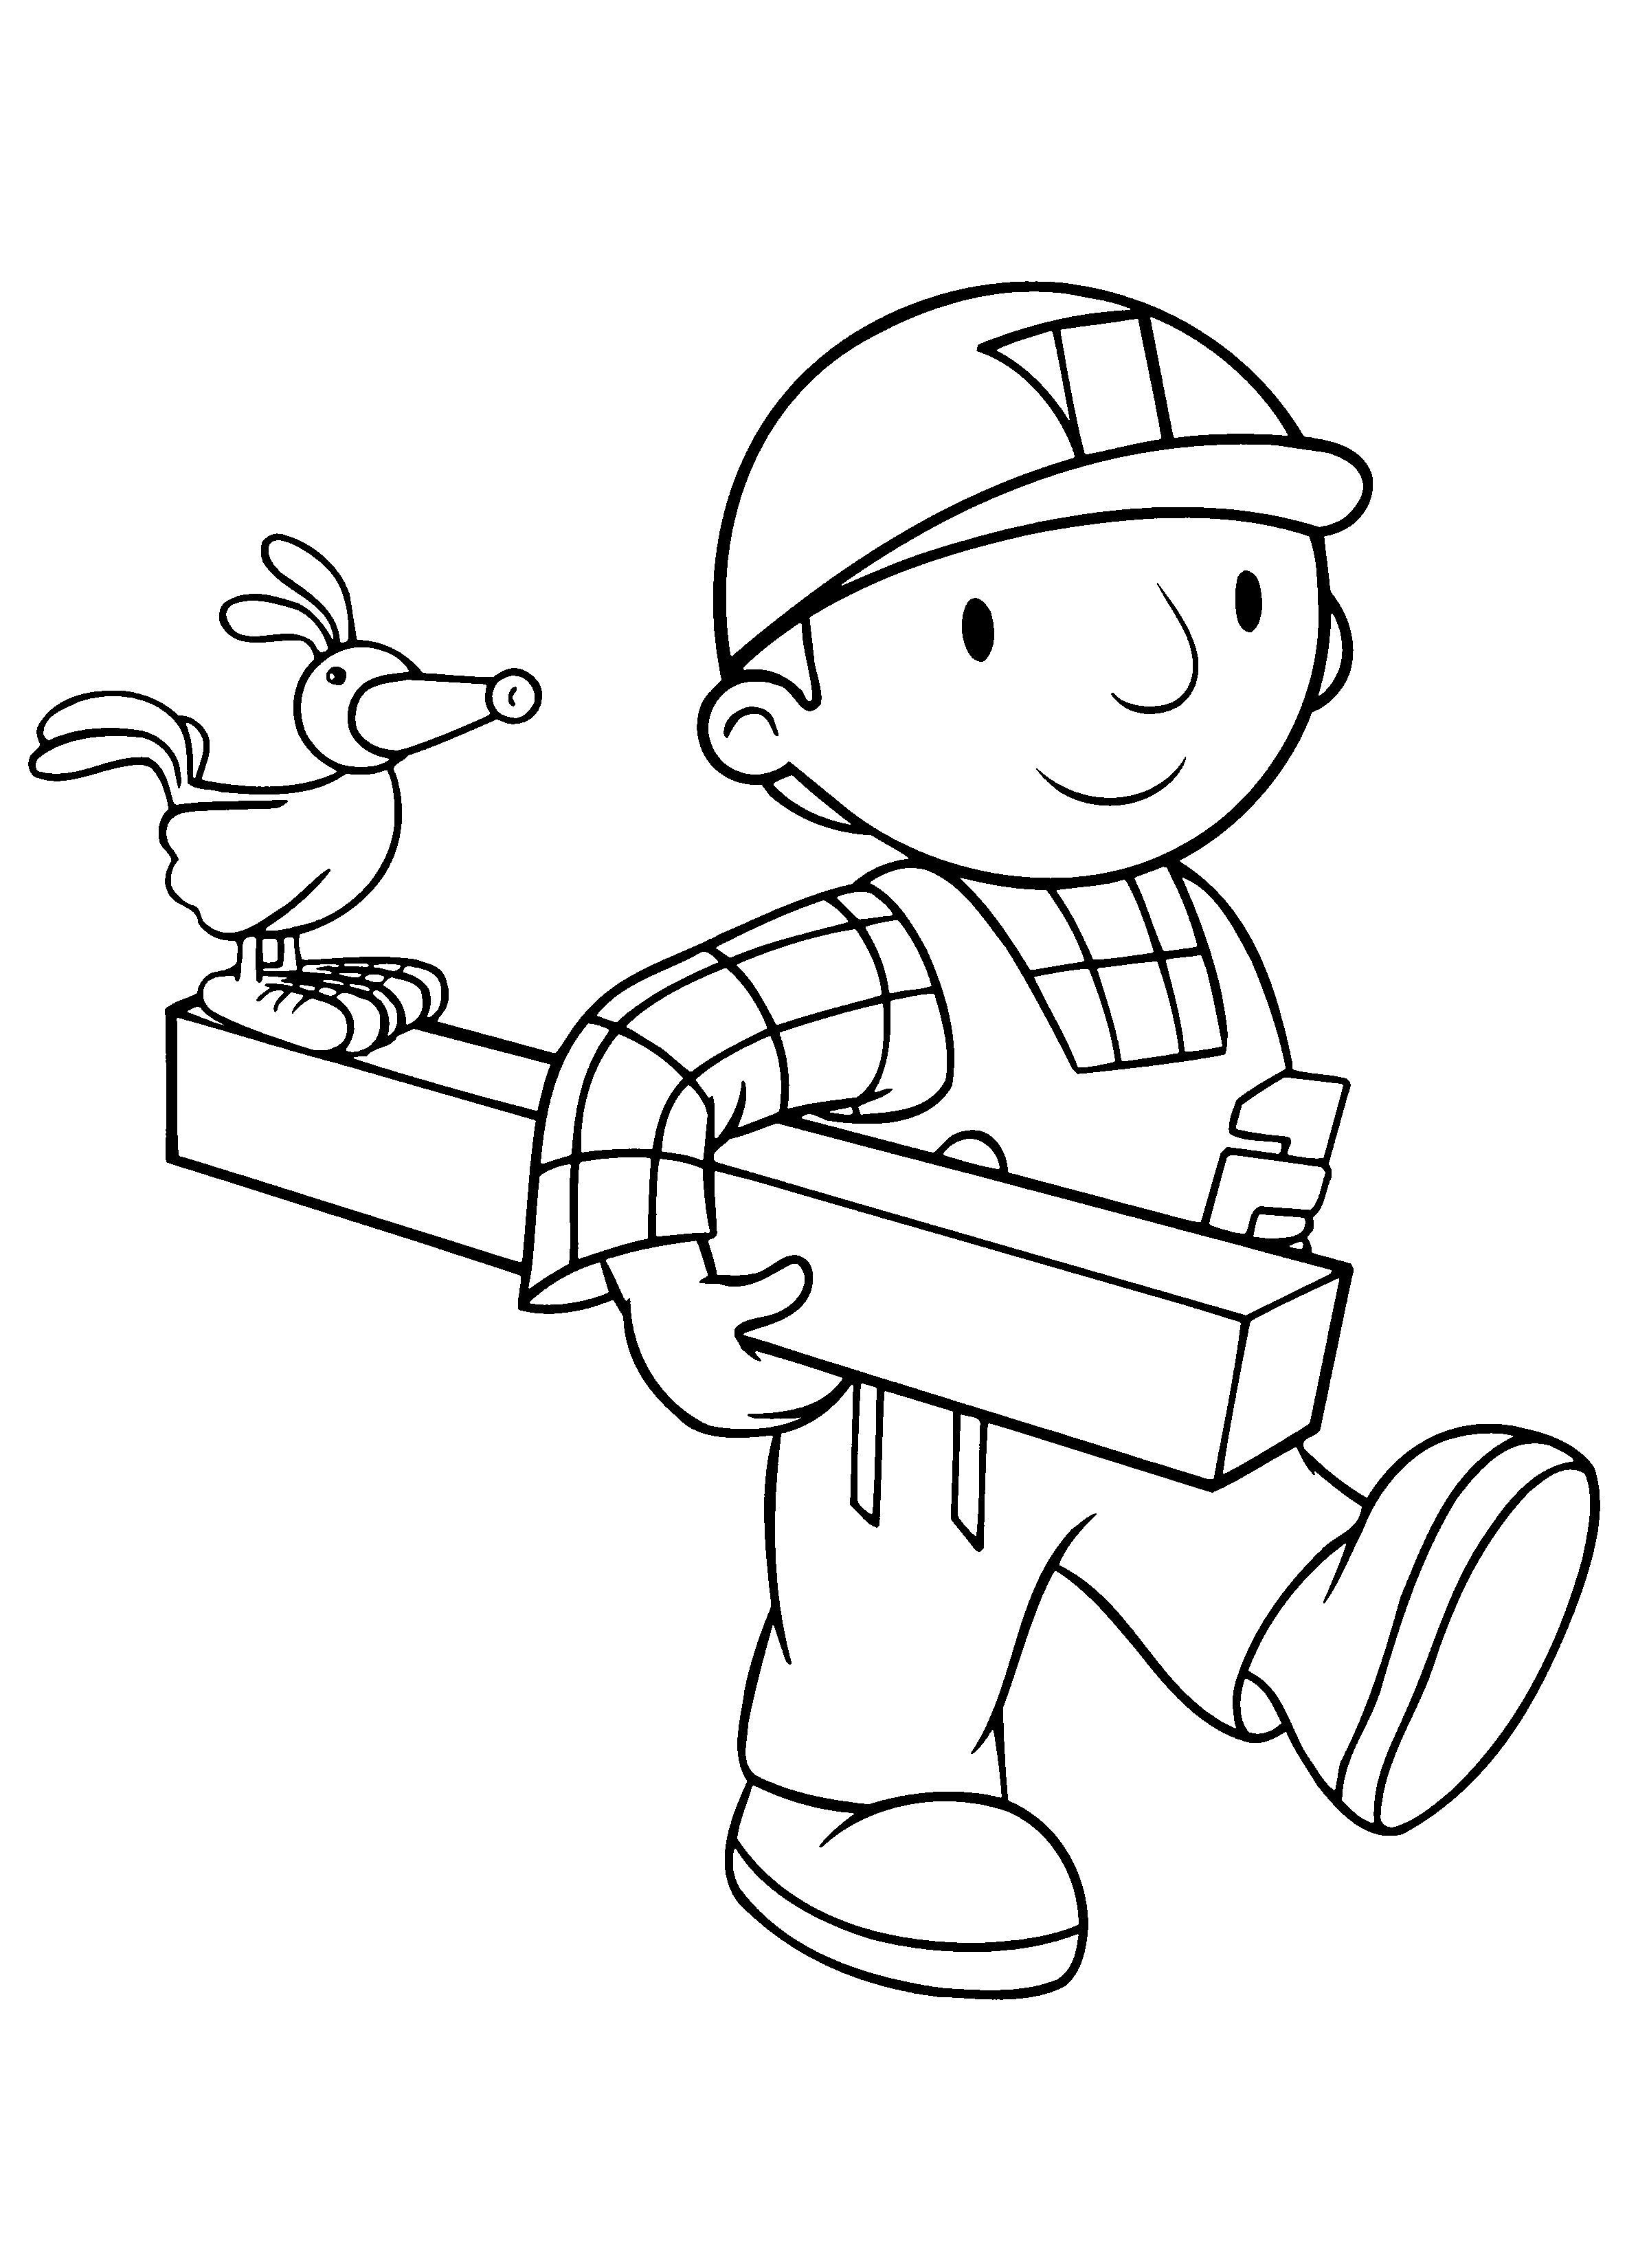 Coloring of Bob the handyman to download free - Bob The Builder Kids